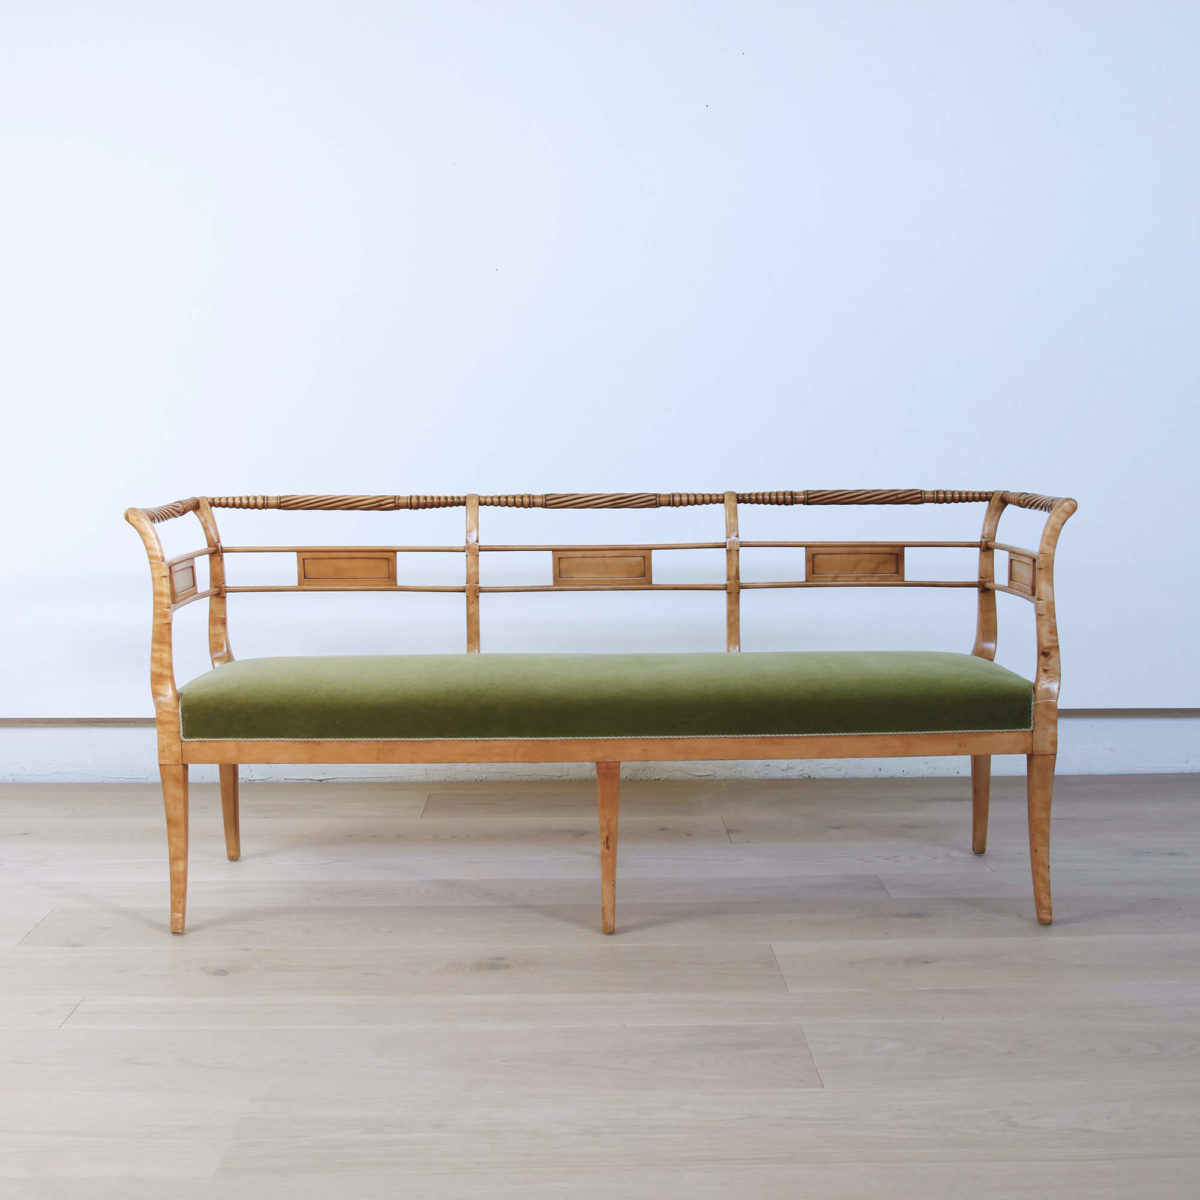 19th Century Northern European Carved Flame Birch Bench - Lawton Mull